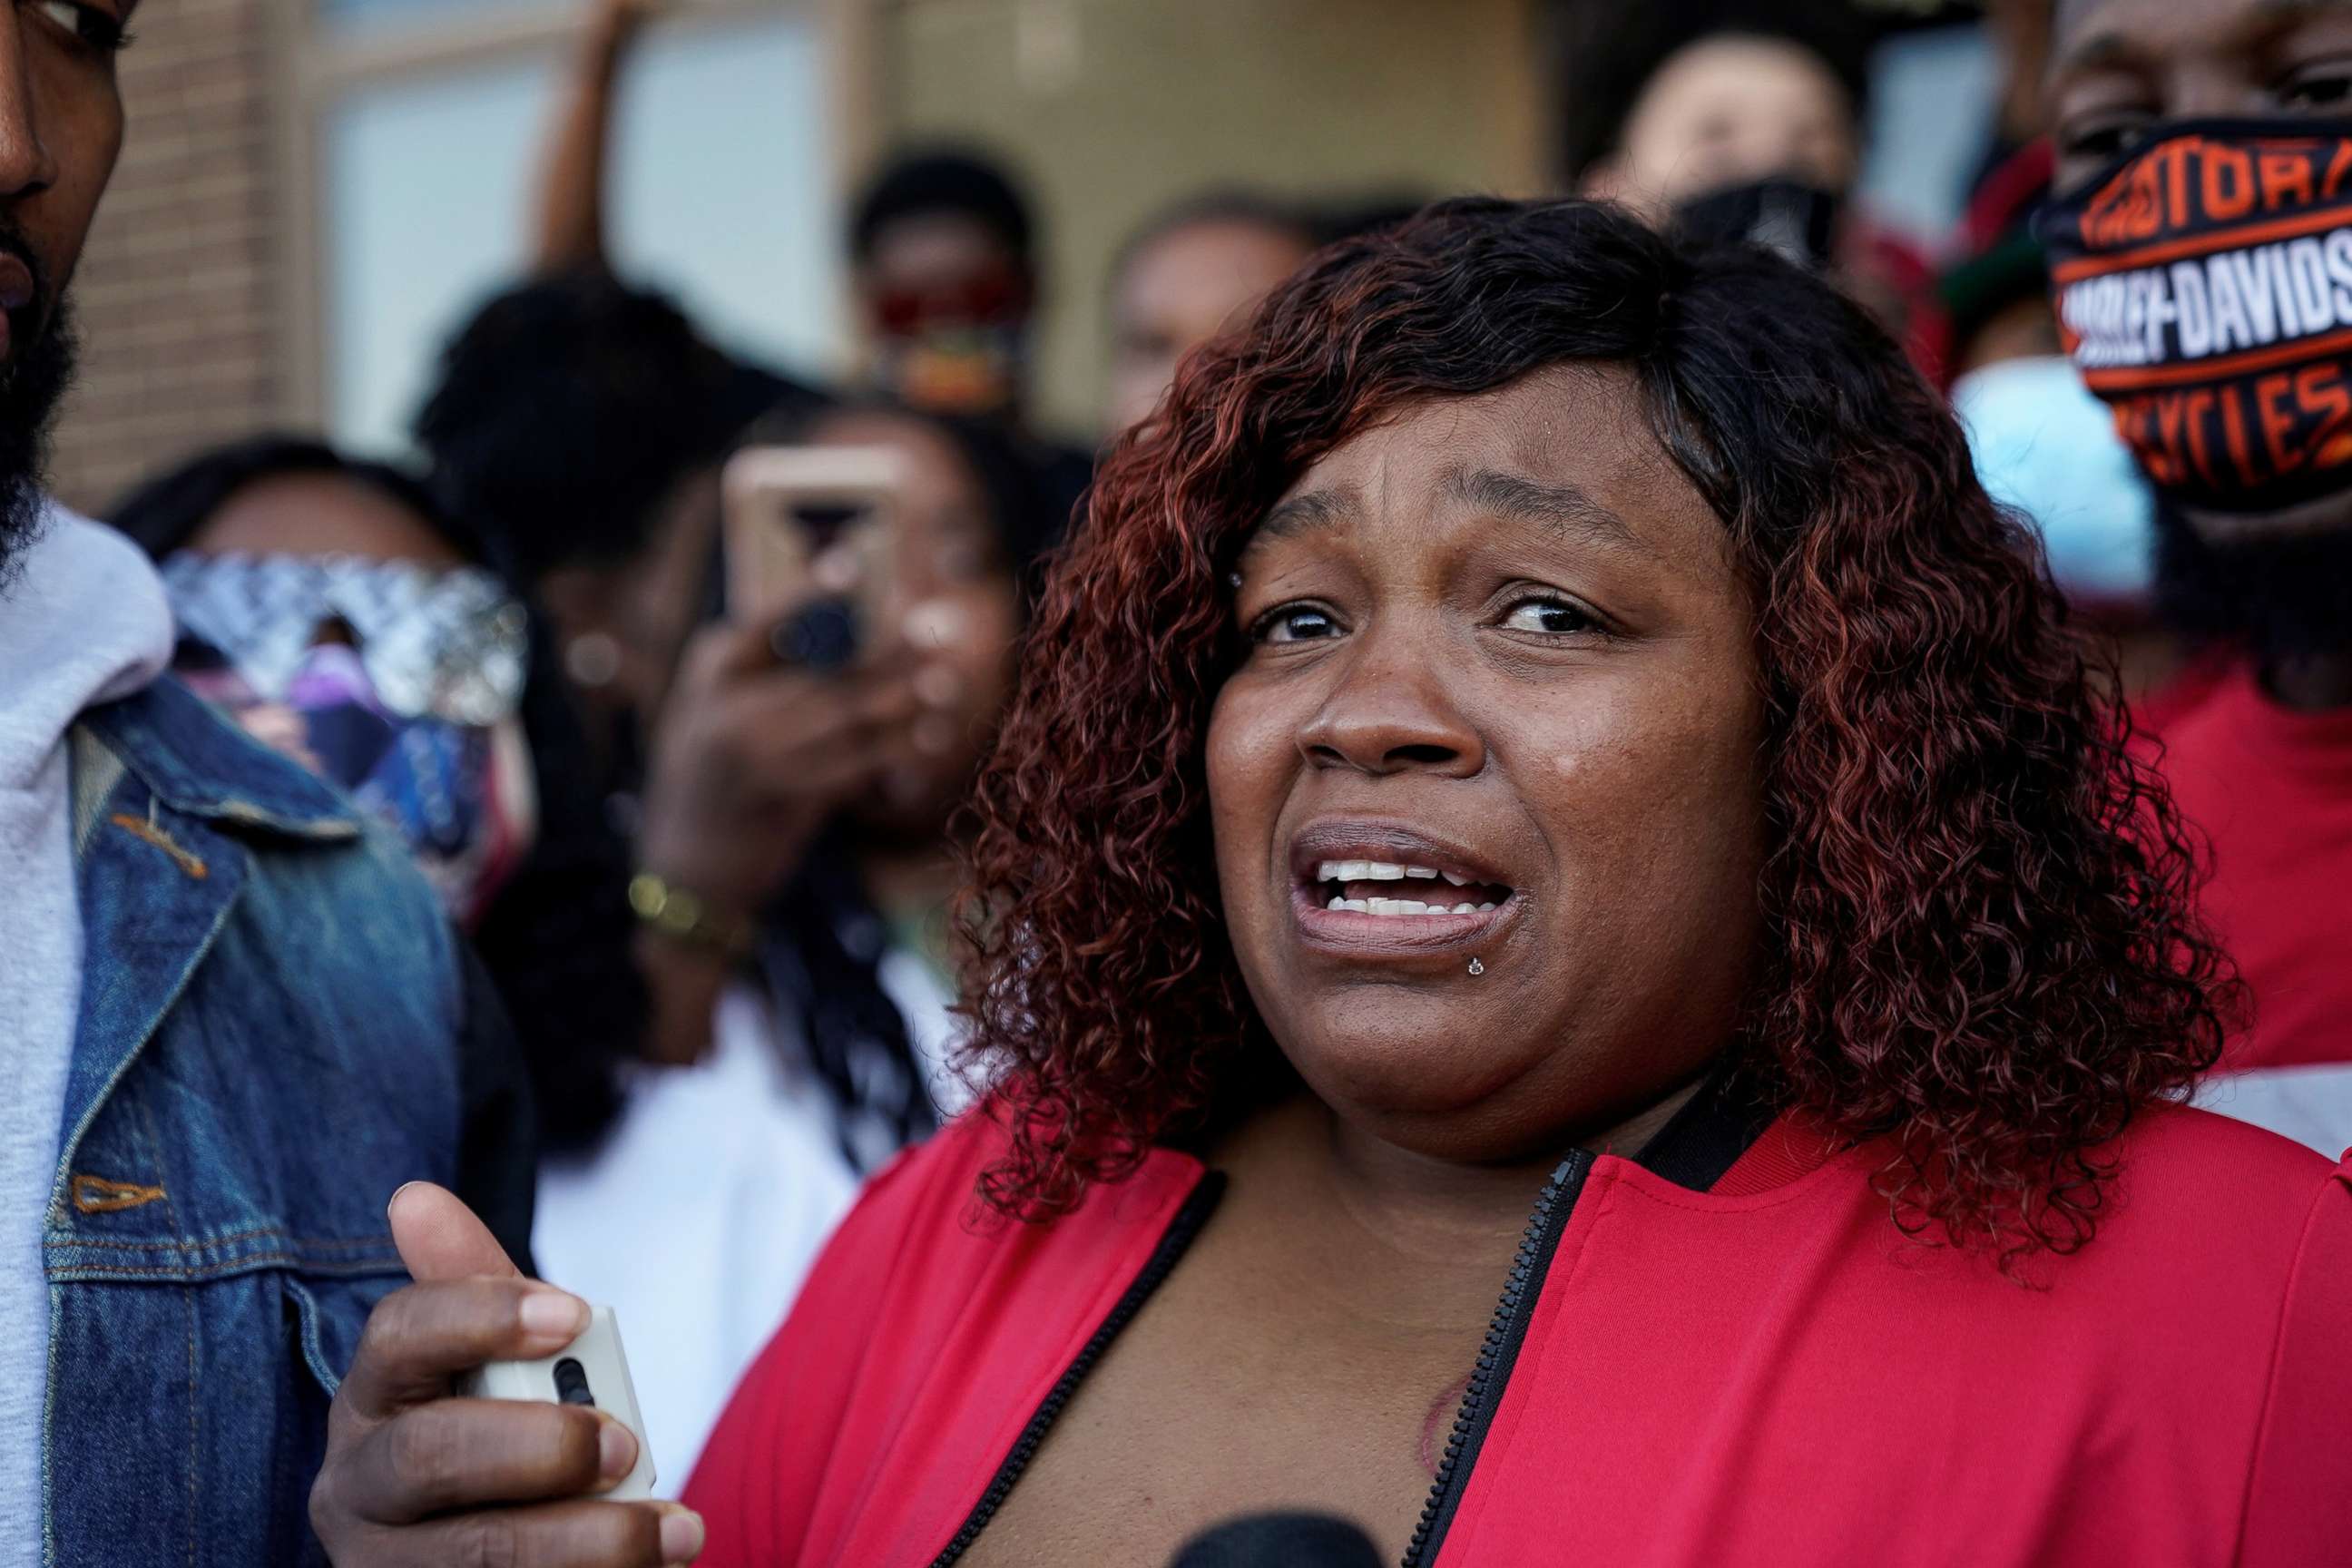 PHOTO: Tamika Palmer, the mother of Breonna Taylor, speaks during a protest on Sept. 18, 2020, while waiting for the findings of the grand jury in the case of Breonna Taylor, shot dead in her apartment by police, in Louisville, Ky.